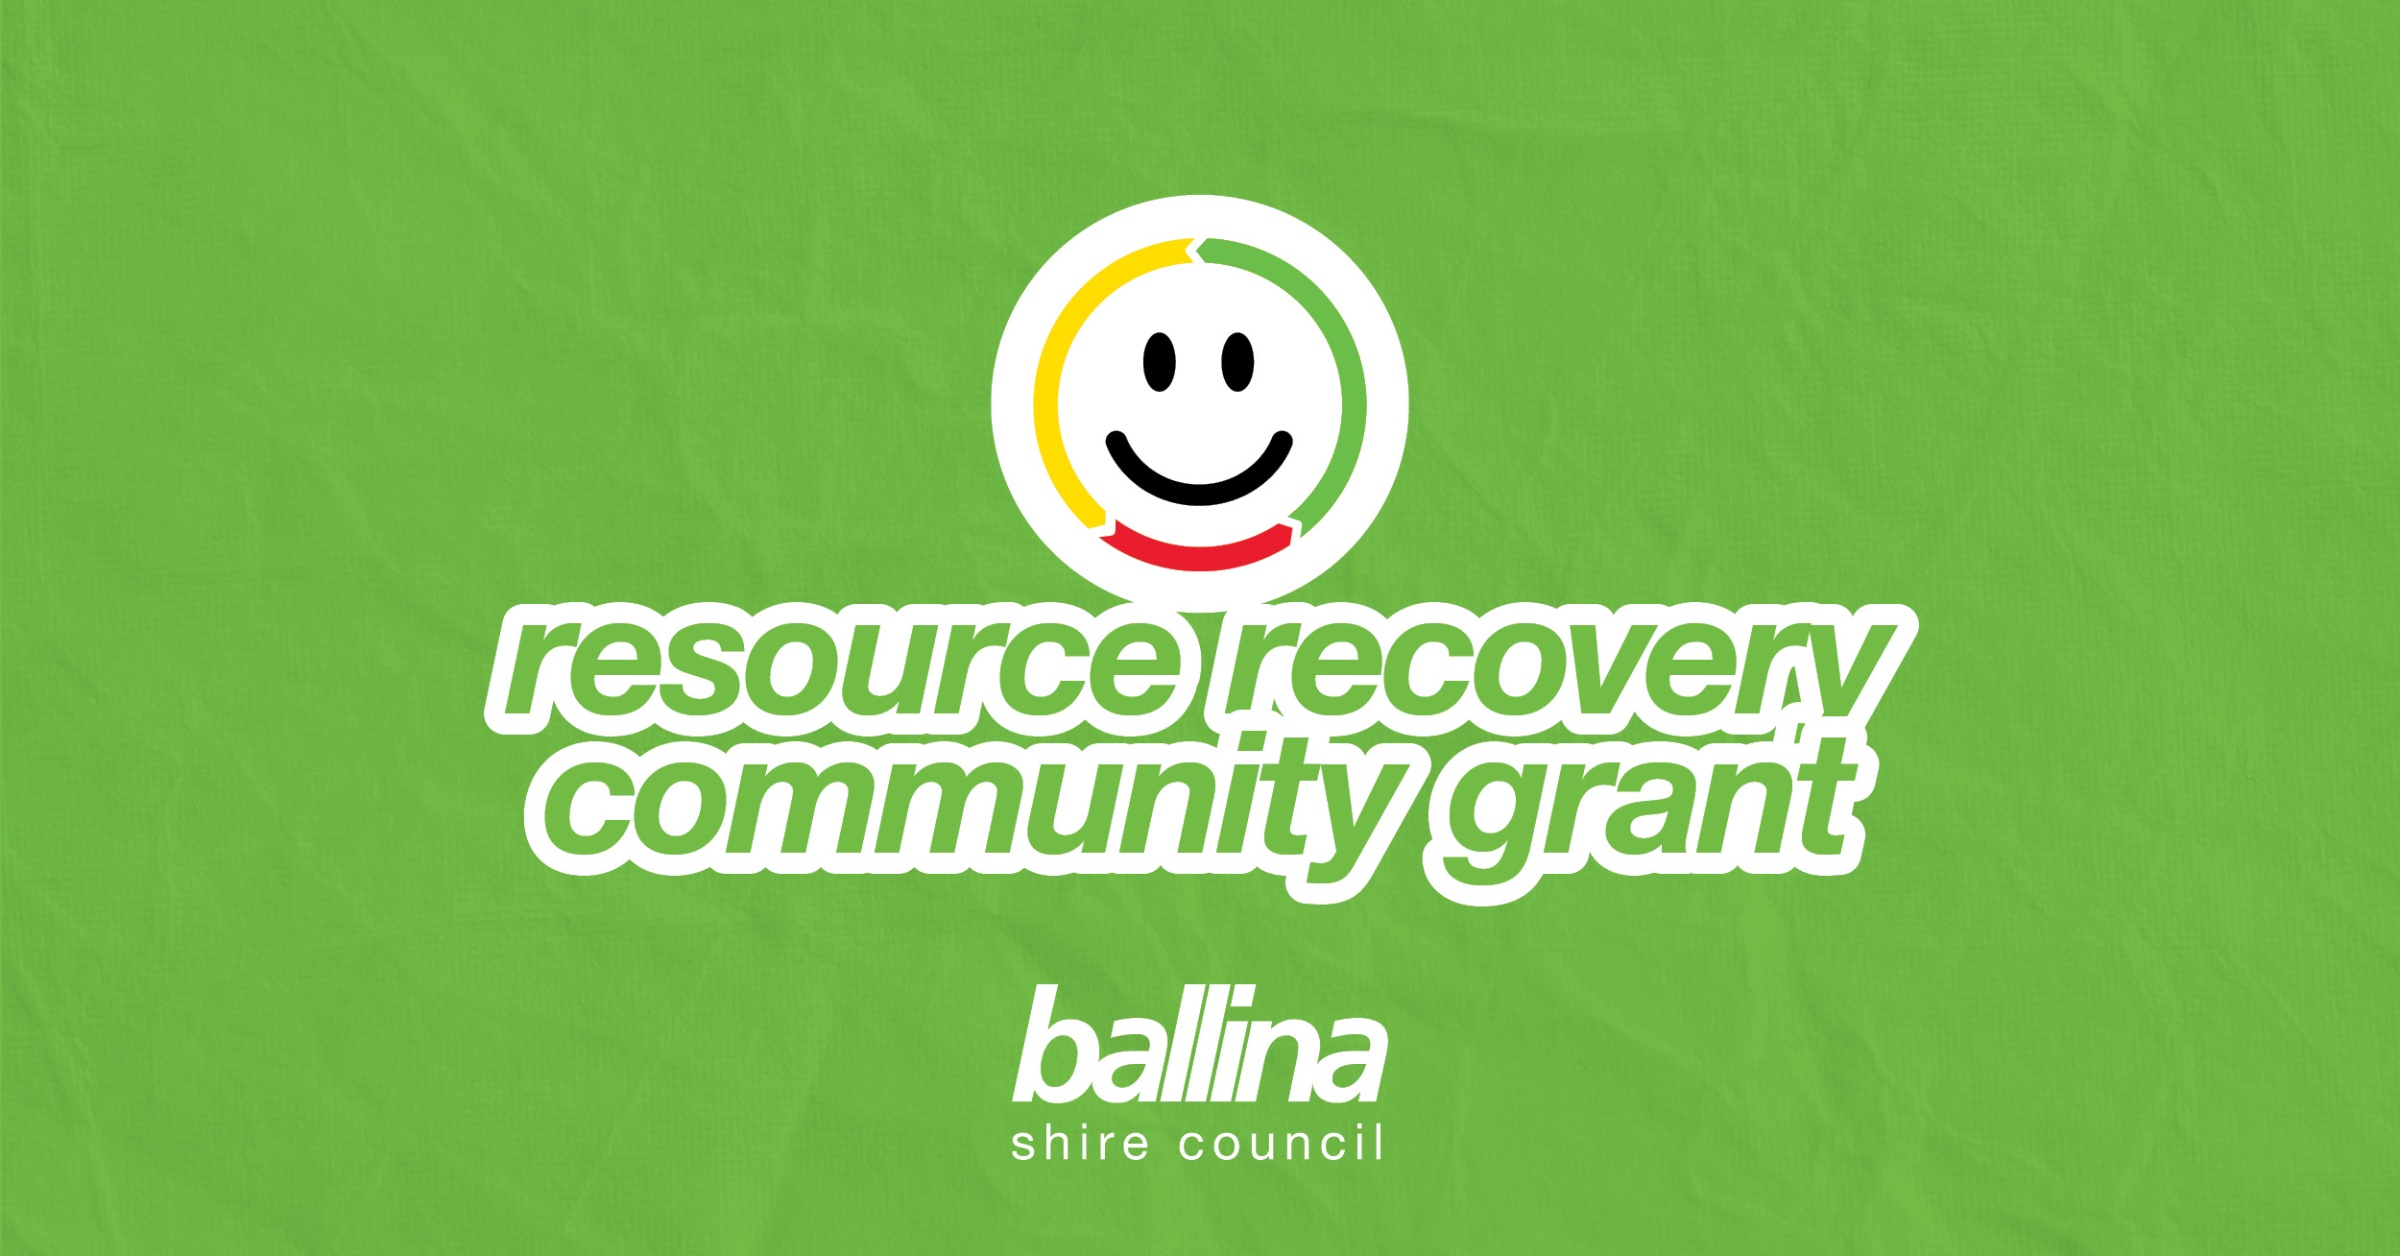 New community grant to fund resource recovery initiatives in Ballina Shire